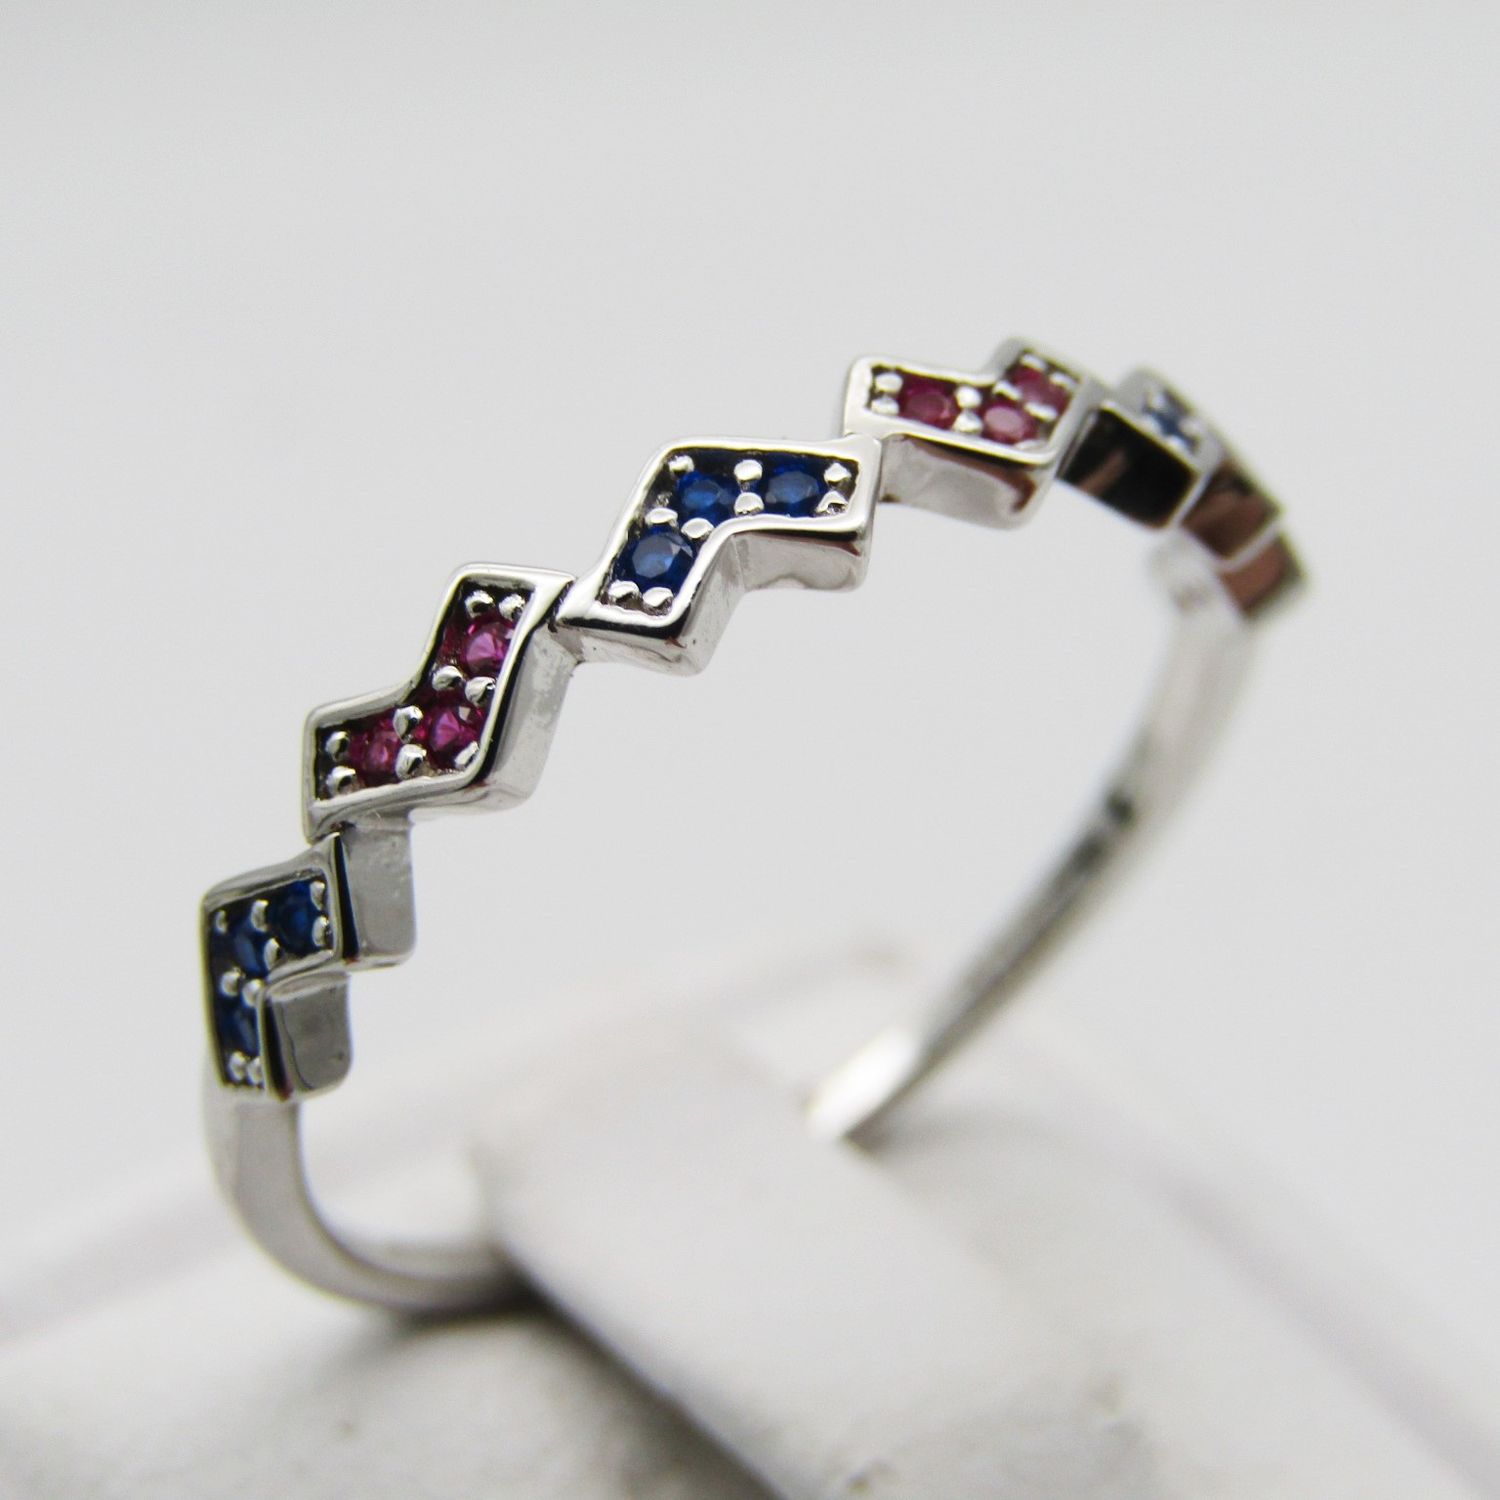 Sterling Silver ring with small blue and pink stones - Size Q - 1,4g